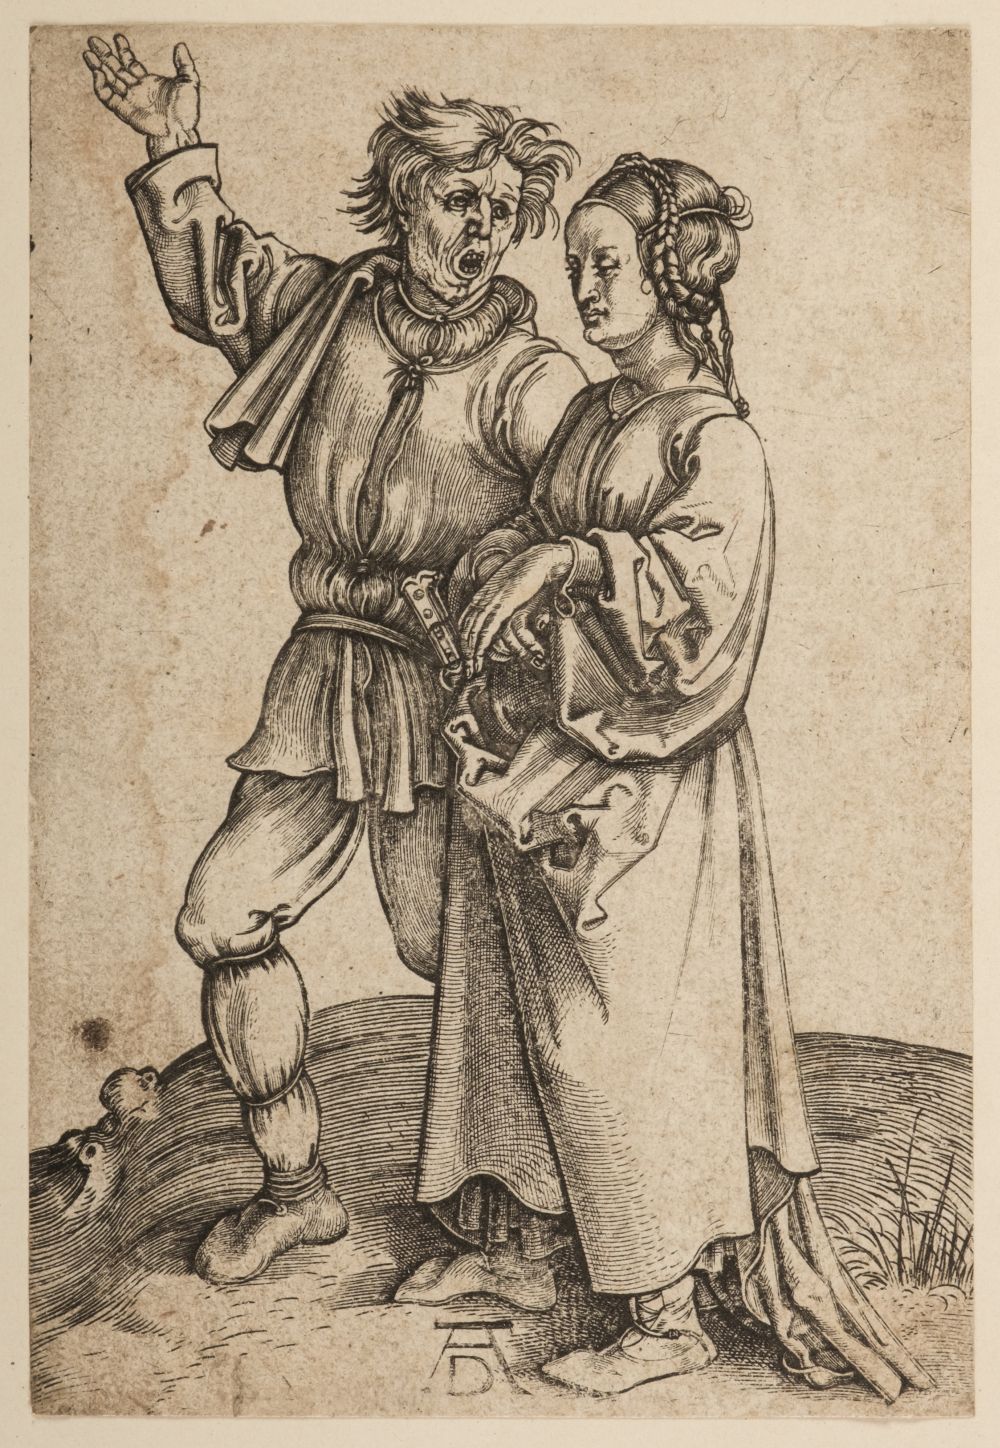 * Durer, Albrecht, 1471-1528. The Peasant and his Wife (Rustic Couple), 1497